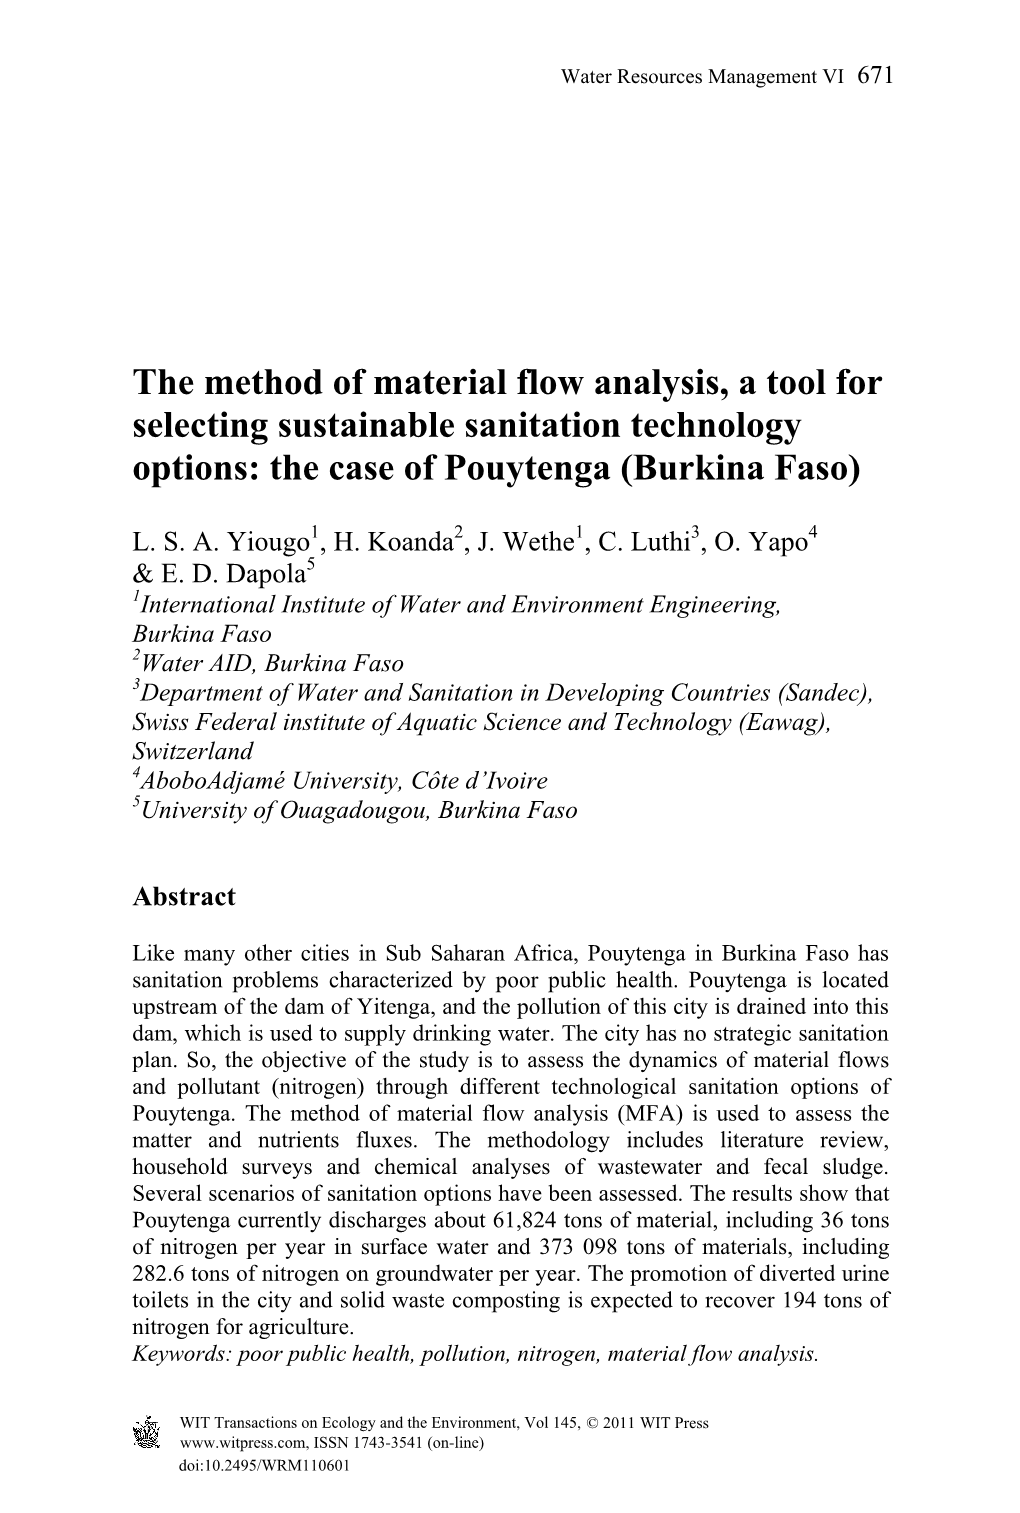 The Method of Material Flow Analysis, a Tool for Selecting Sustainable Sanitation Technology Options: the Case of Pouytenga (Burkina Faso)